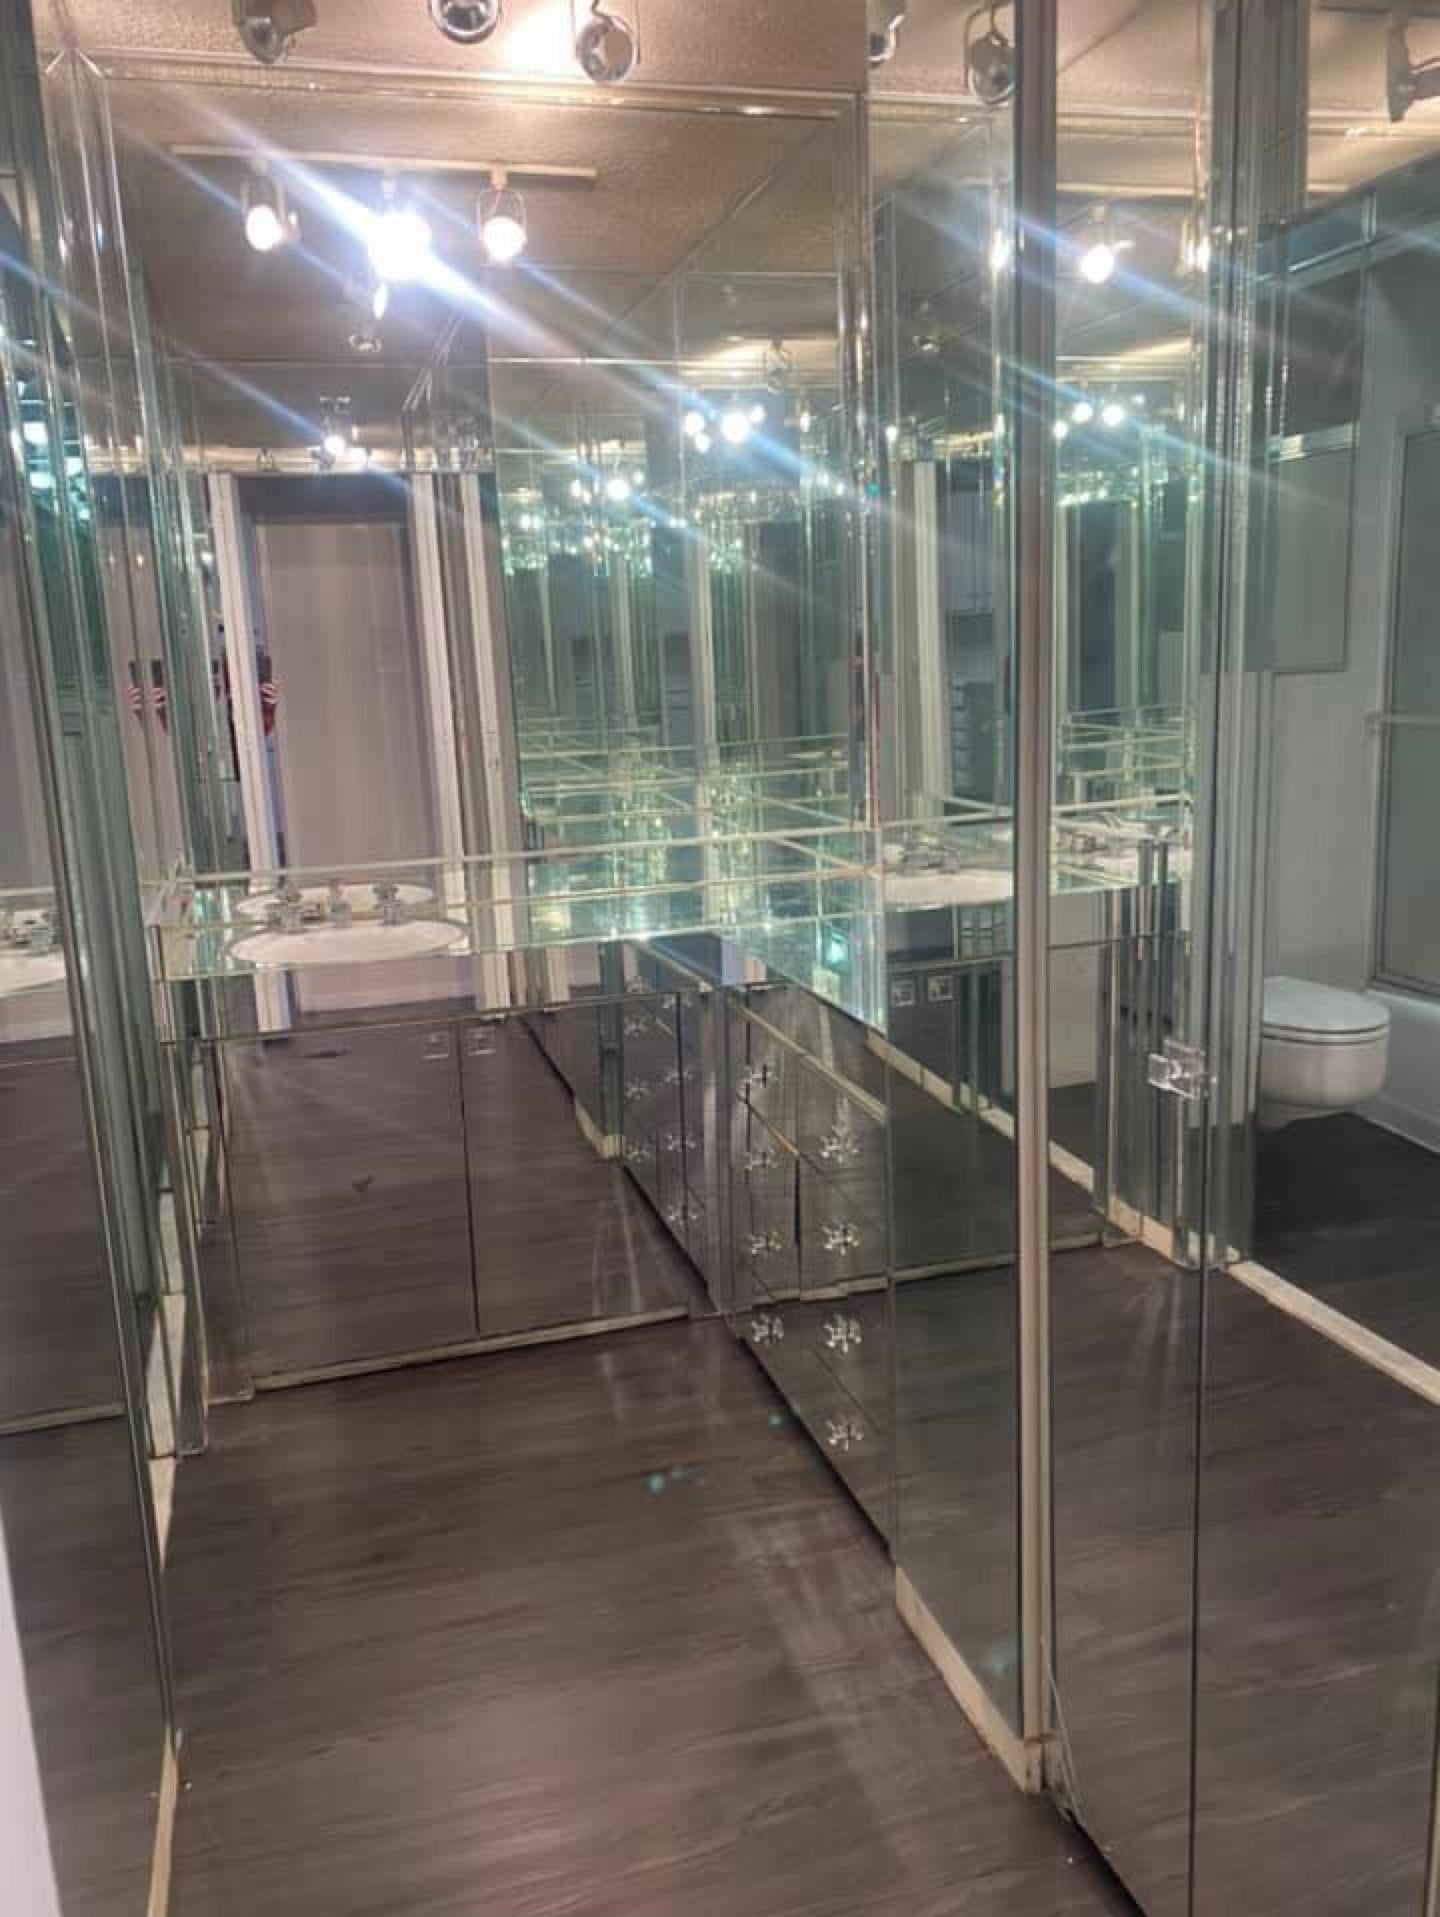 A bathroom filled with mirrors